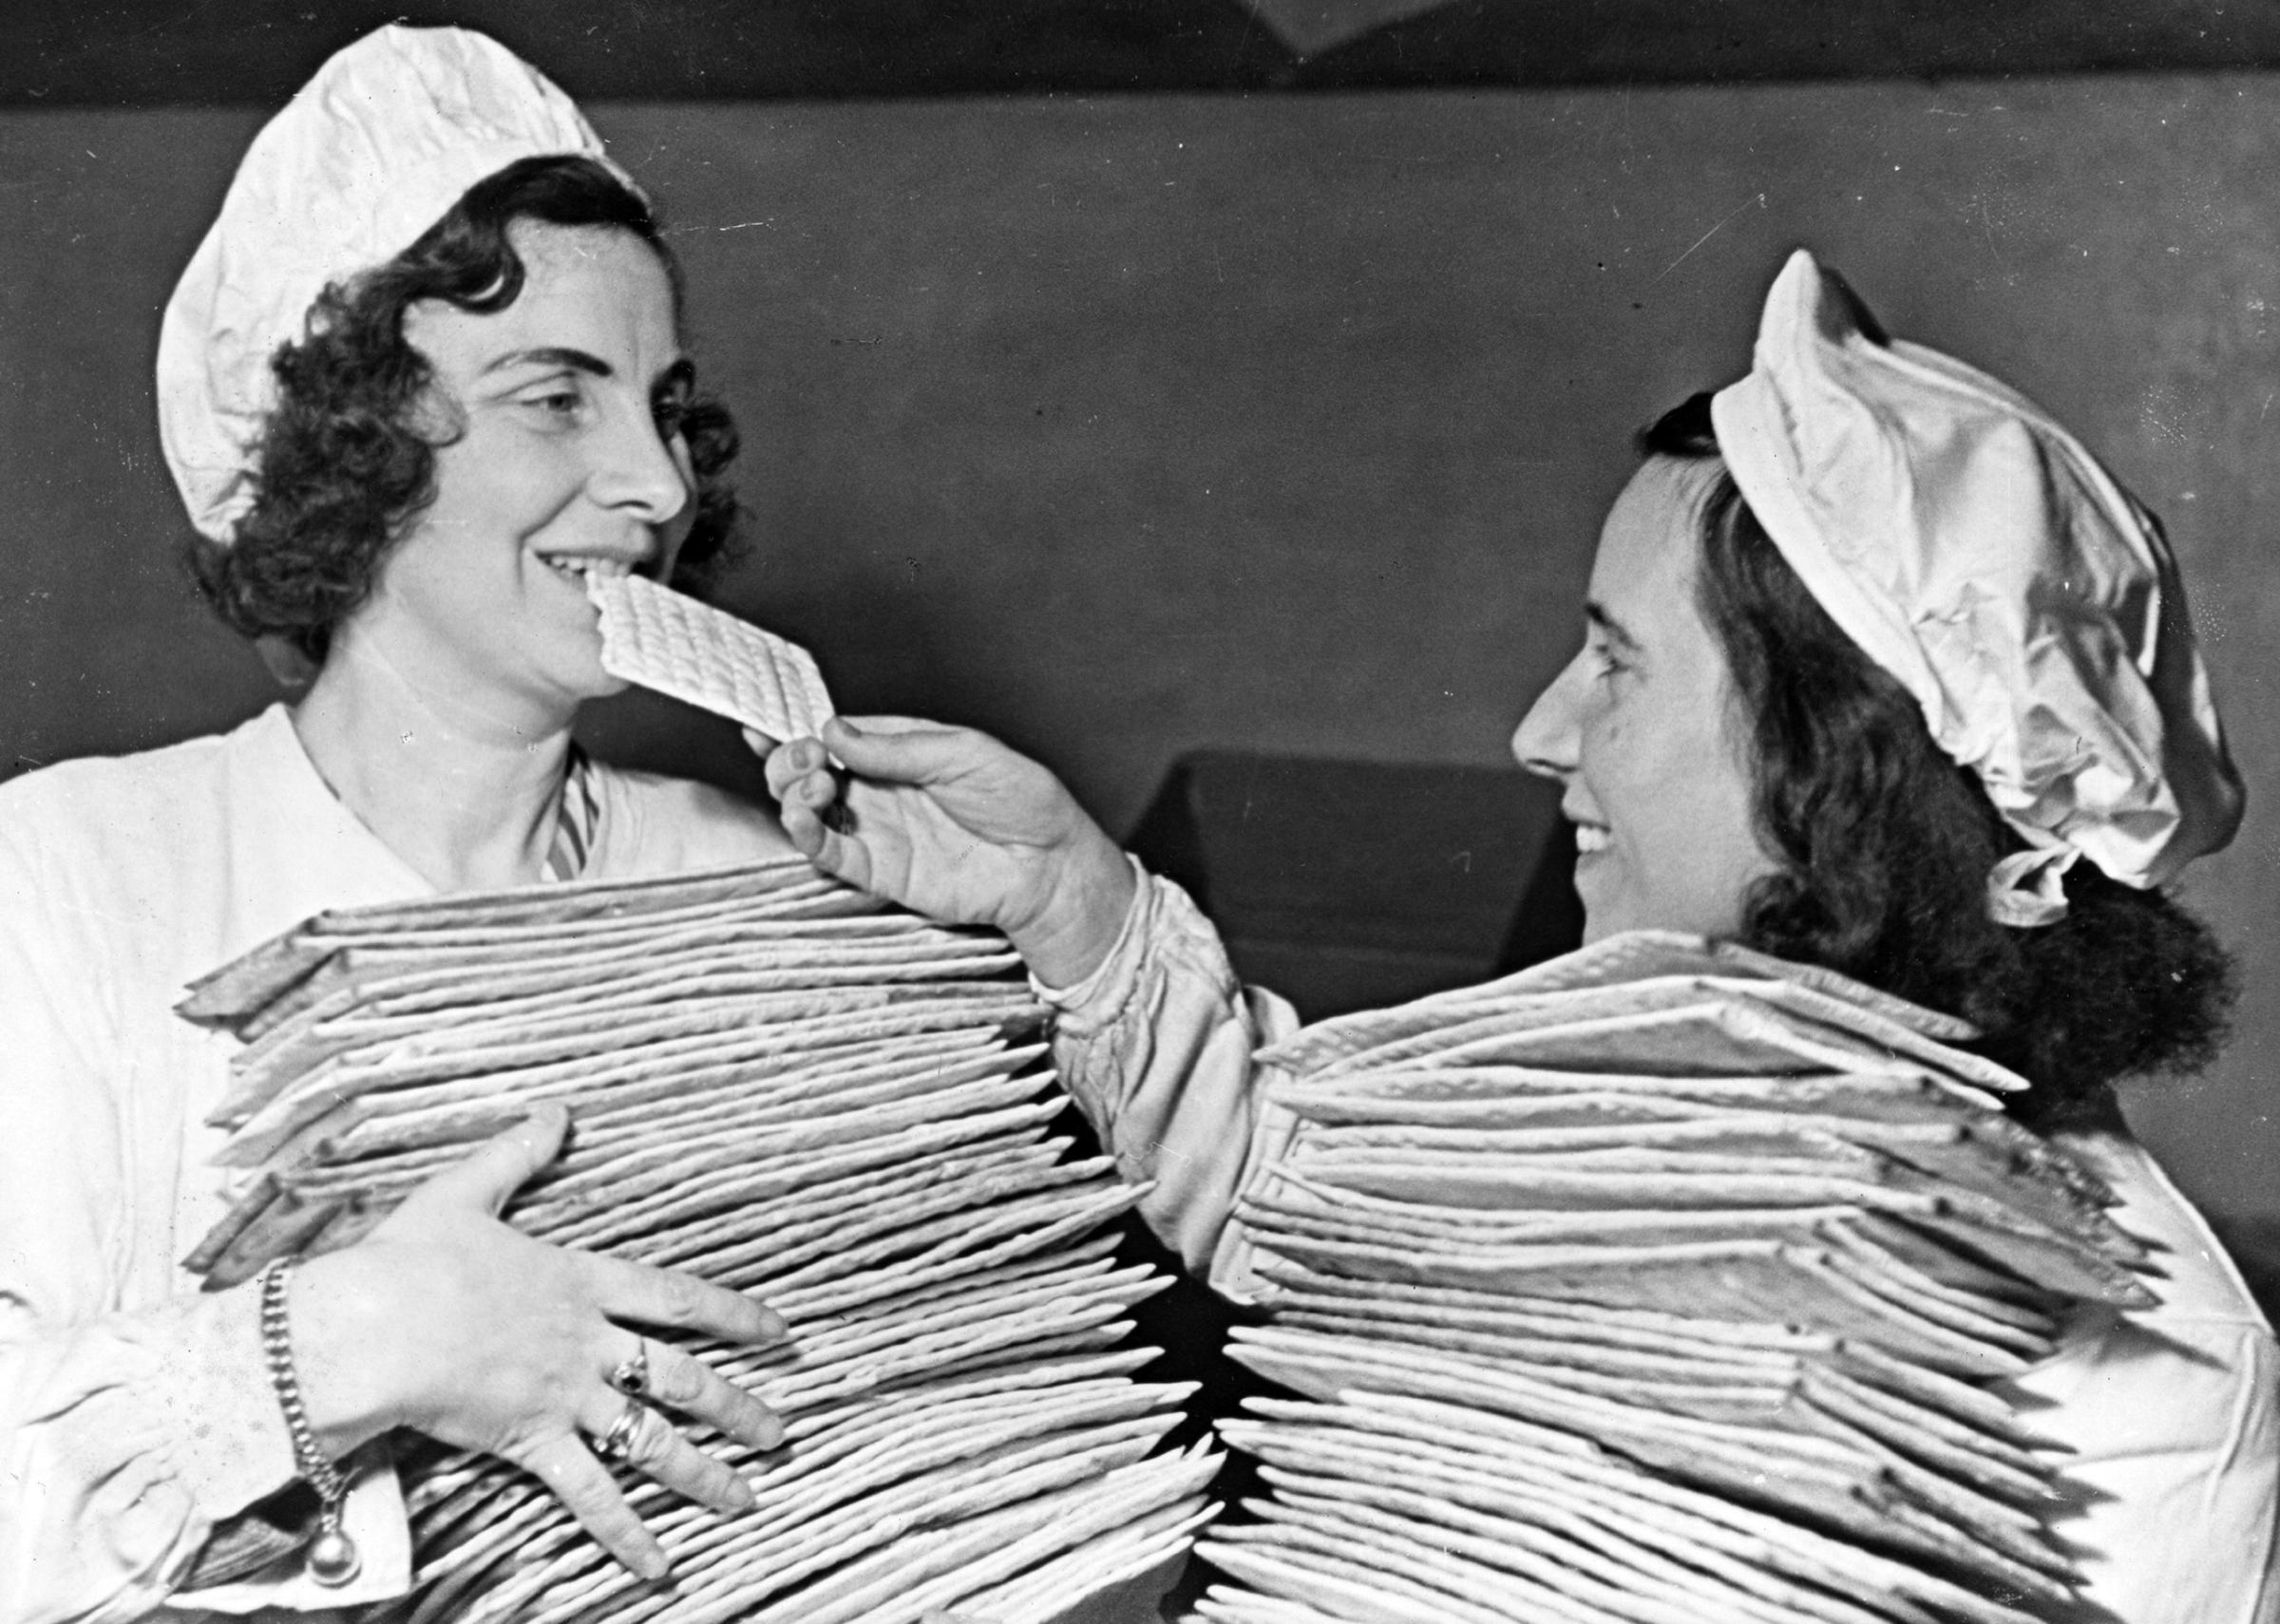 Two young women in the Sarotti Fabrik Bakery, where a goal of 85,000 pounds of matzah for Passover was set after a 10 year closure by official edict. Berlin, Germany, 1946. Photographer unknown.